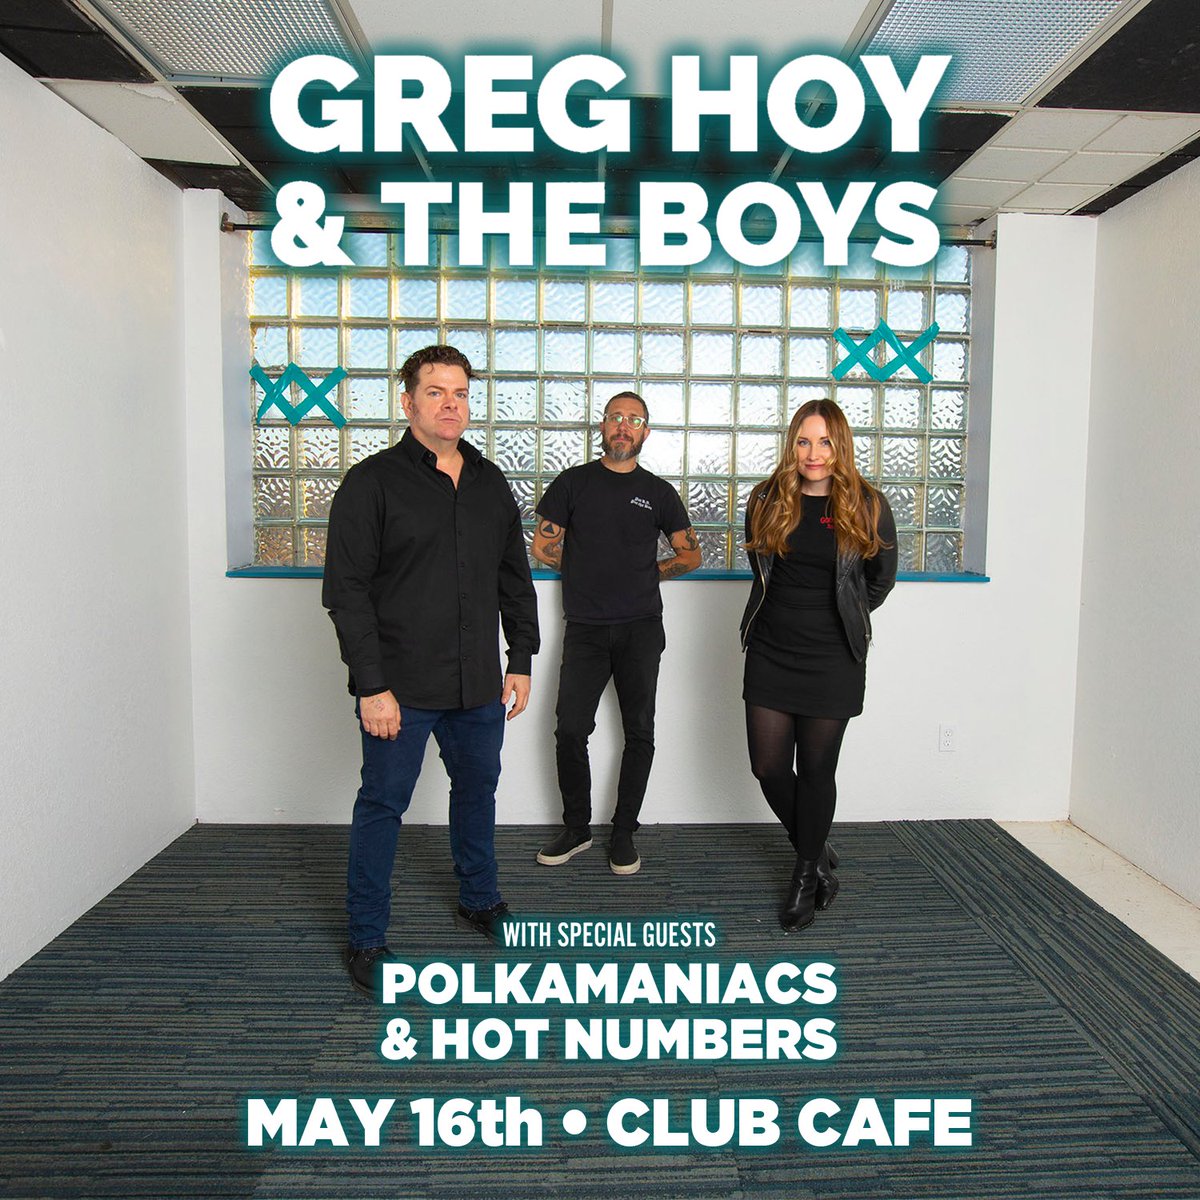 🎶 TONIGHT 🎶

05/16 | @thegreghoy with special guests @polkamaniacs & #HotNumbers | @ClubCafeLive

🎟️ Buy Tixs: tinyurl.com/59mmmyuu  
Doors: 7:00pm 

Tickets are available for purchase online or at the door. 
#tonight #pghconcerts #clubcafe #clubcafelive #livemusic #music